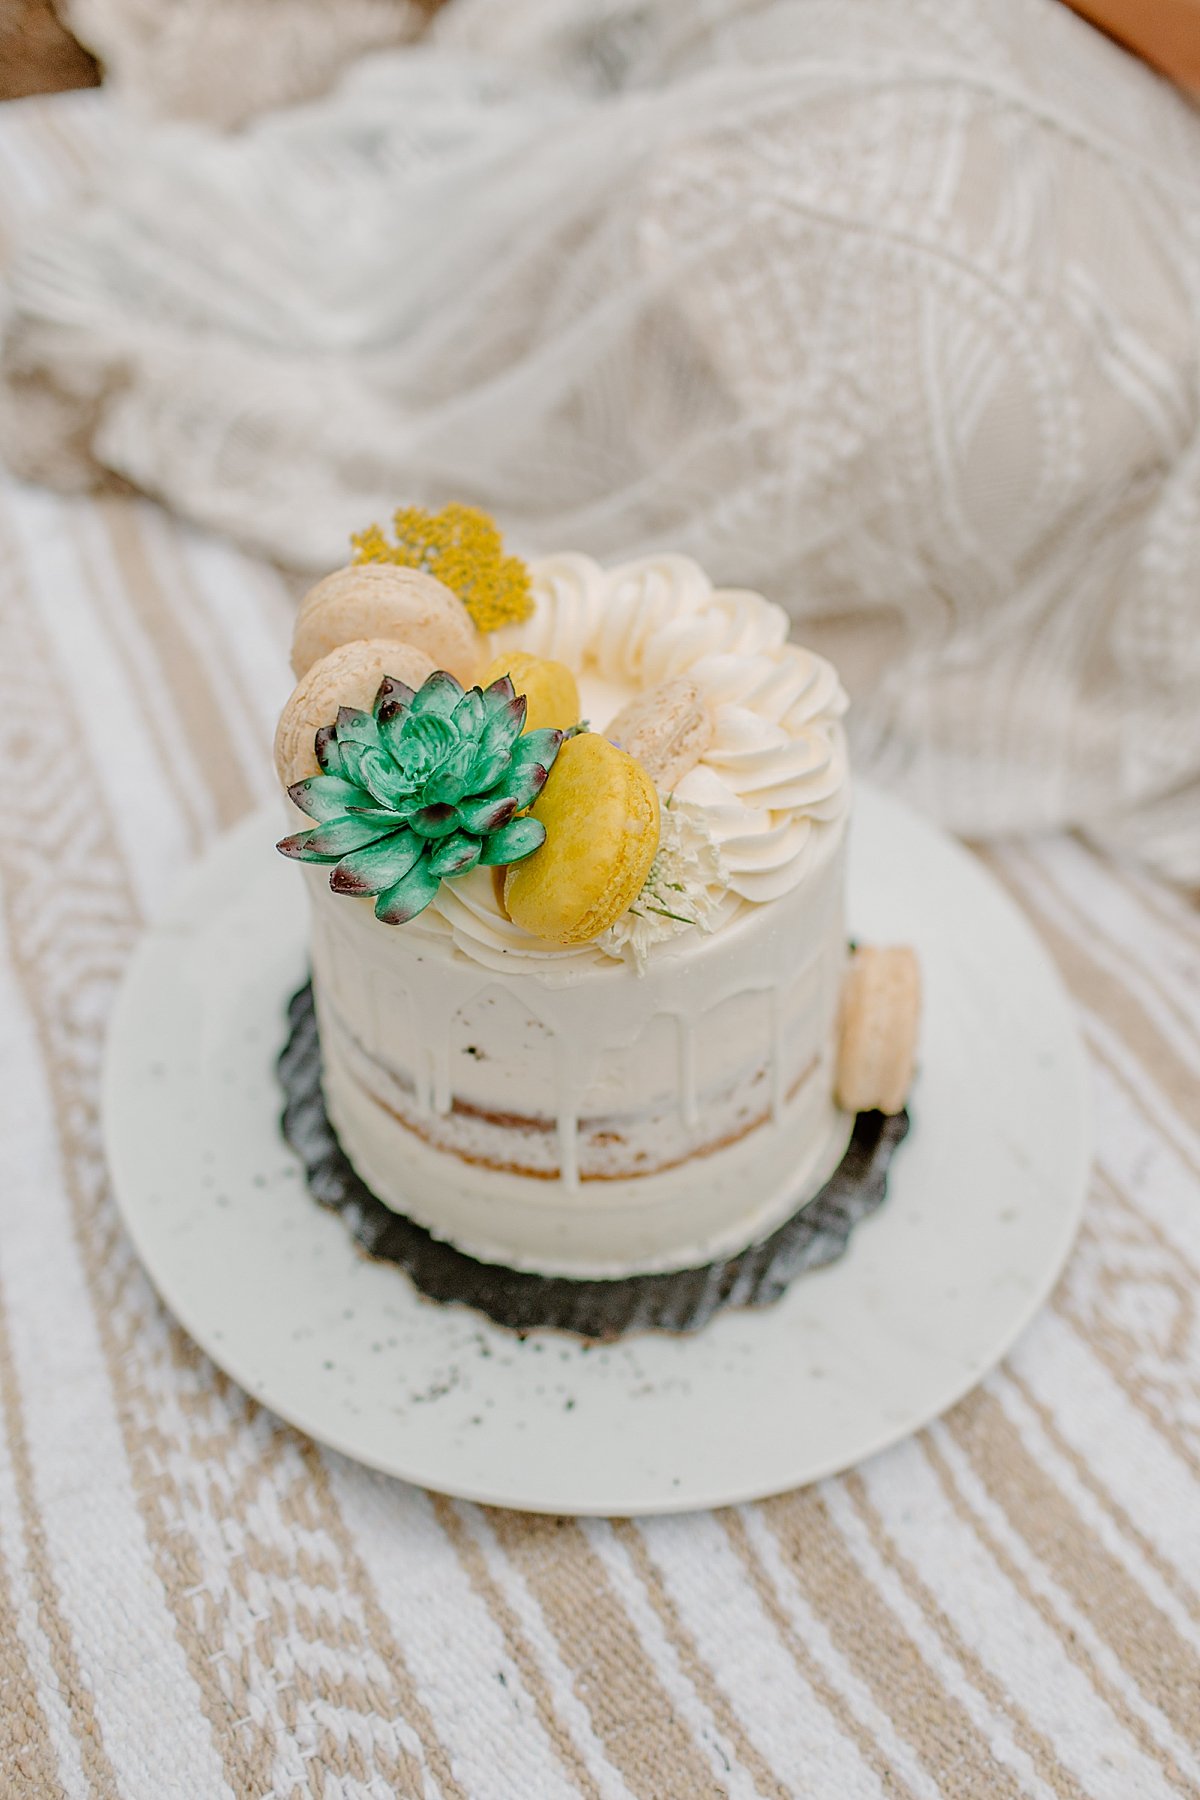  Single layer wedding cake with floral design on picnic blanket at Greer elopement 